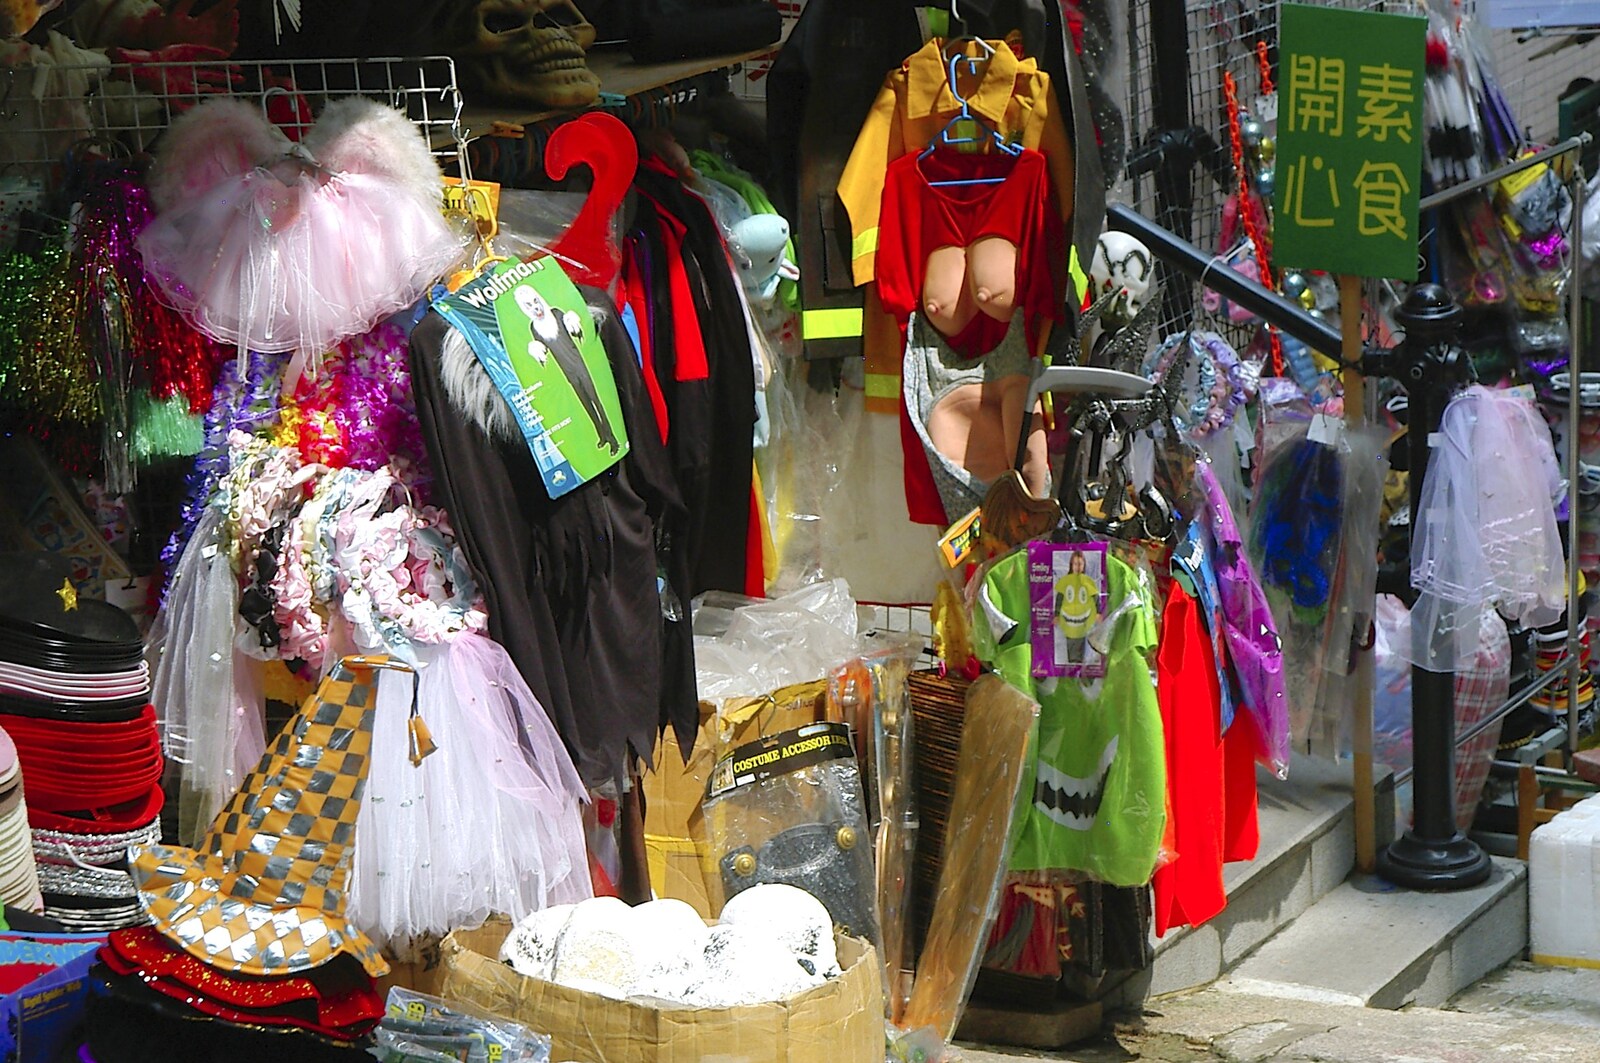 A street stall with a pair of plastic breasts from Wan Chai and Central, Hong Kong, China - 2nd October 2006